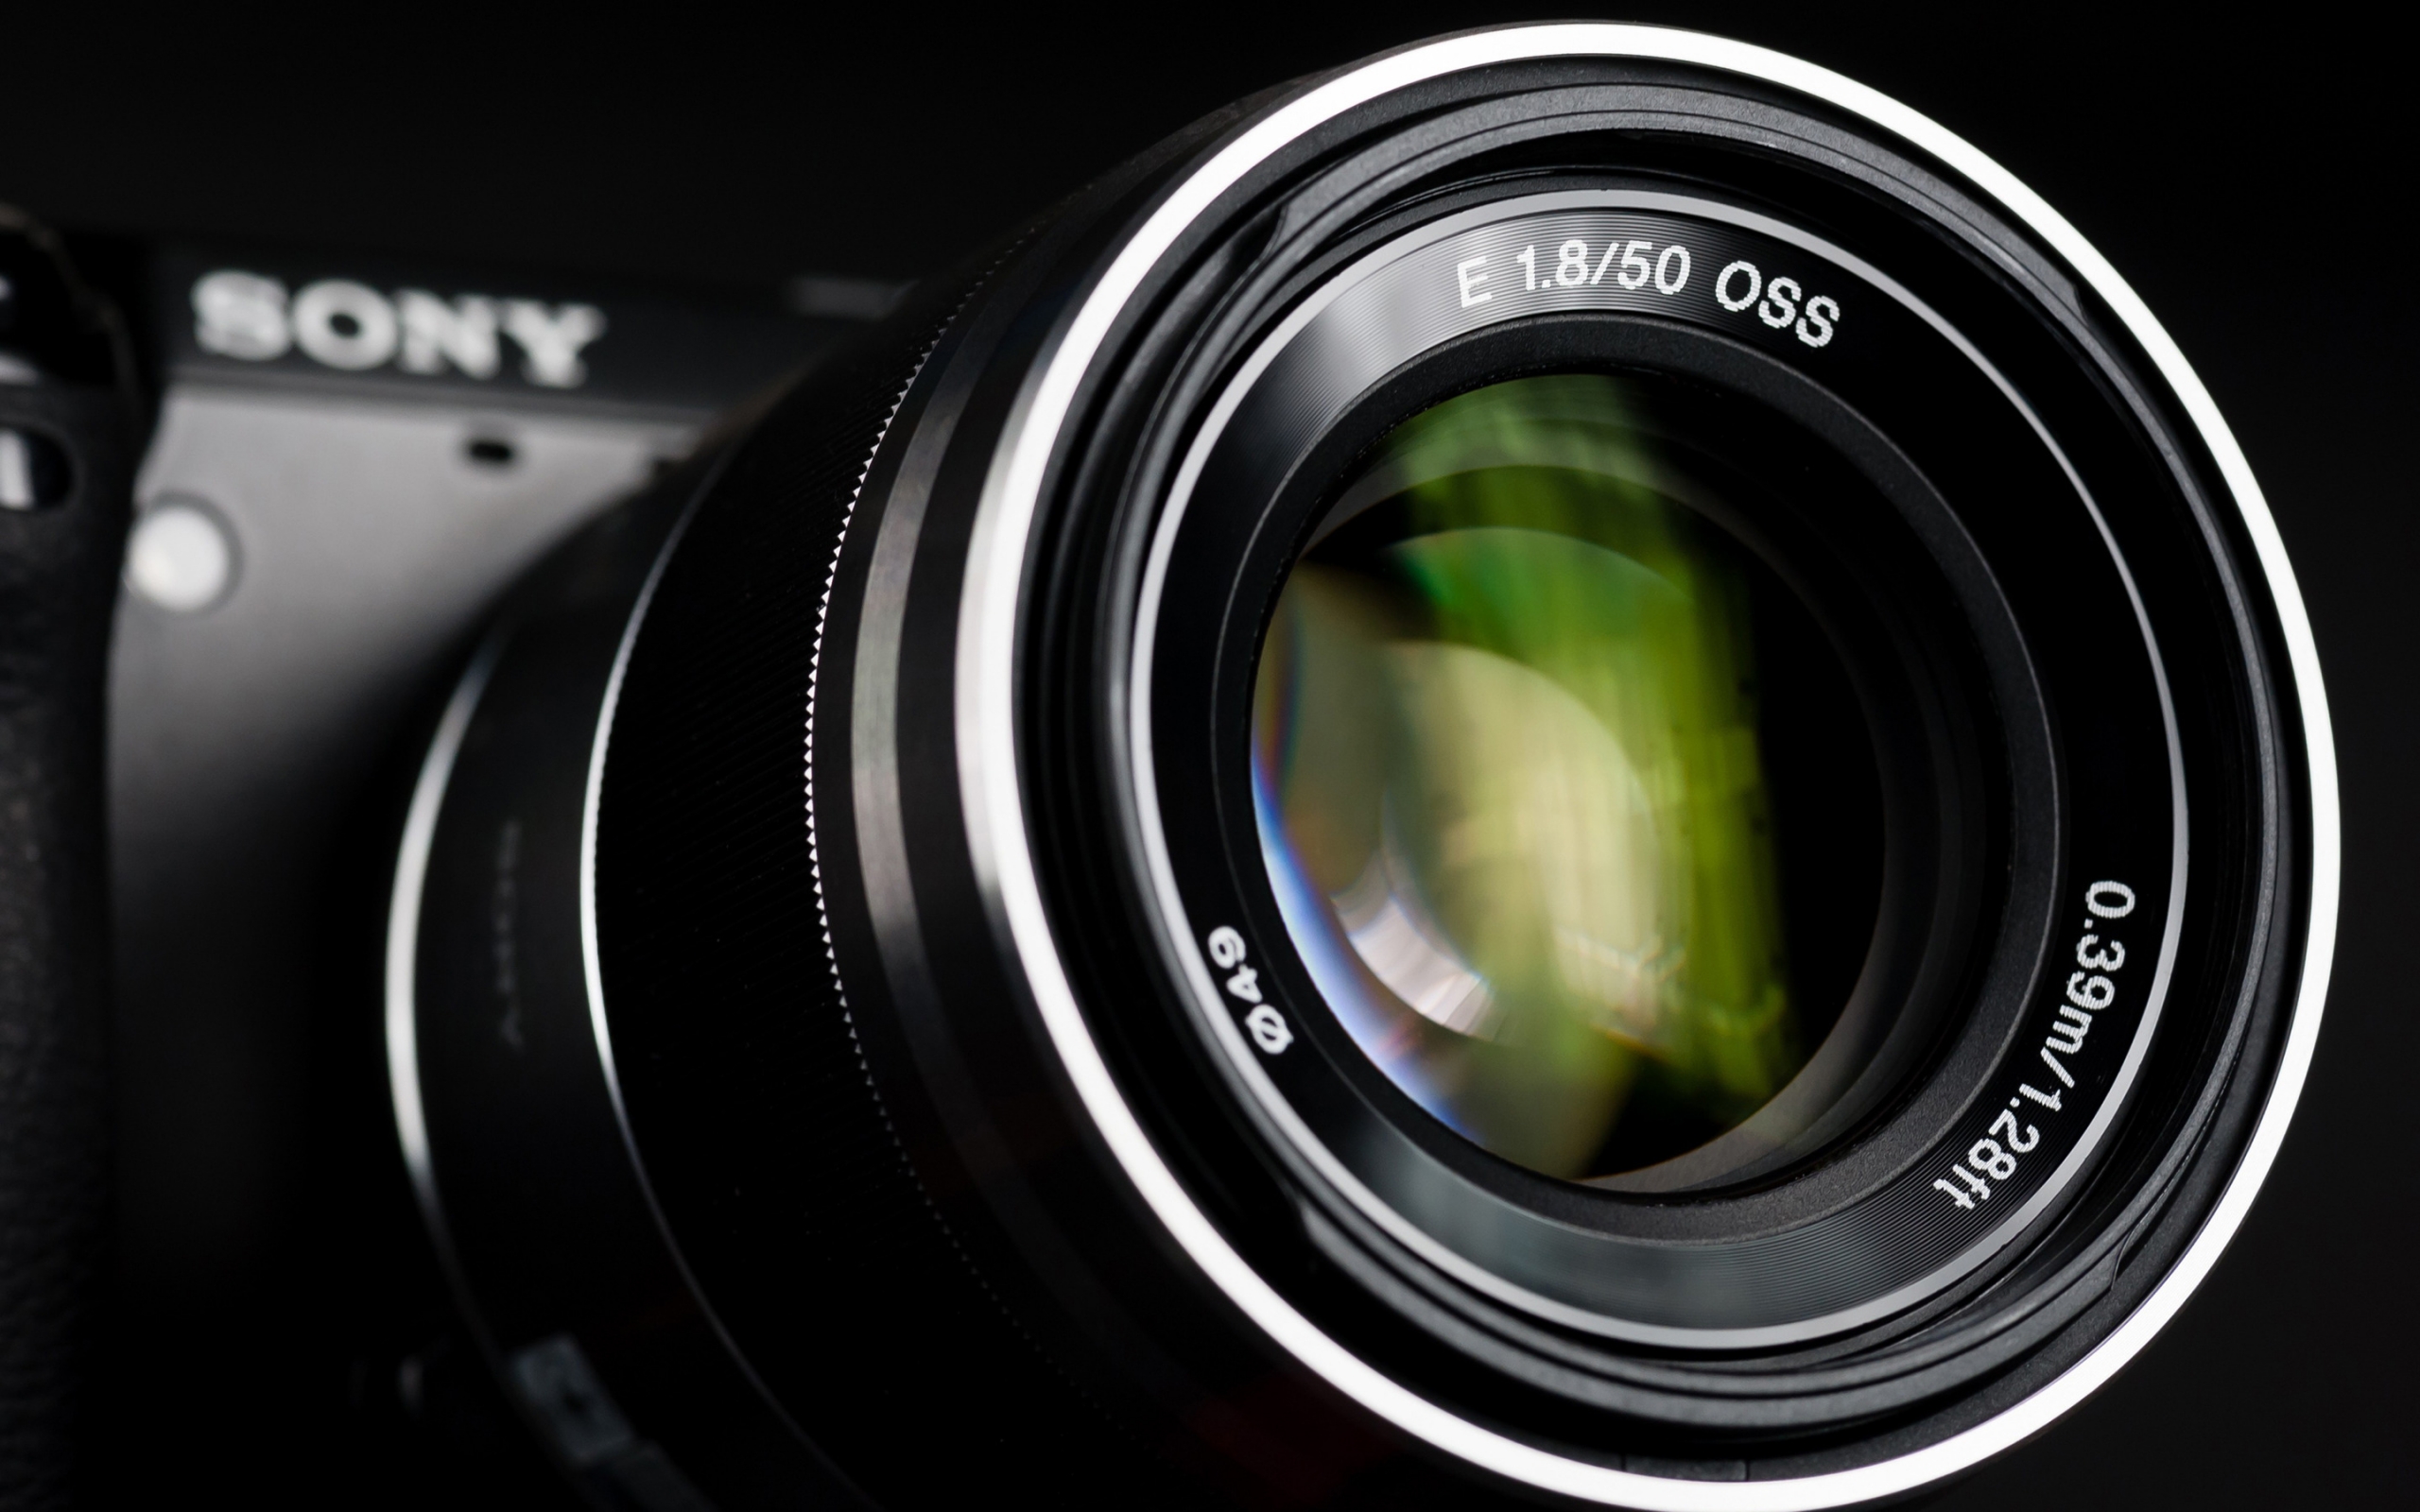 Sony Camera Lens for 2560 x 1600 widescreen resolution